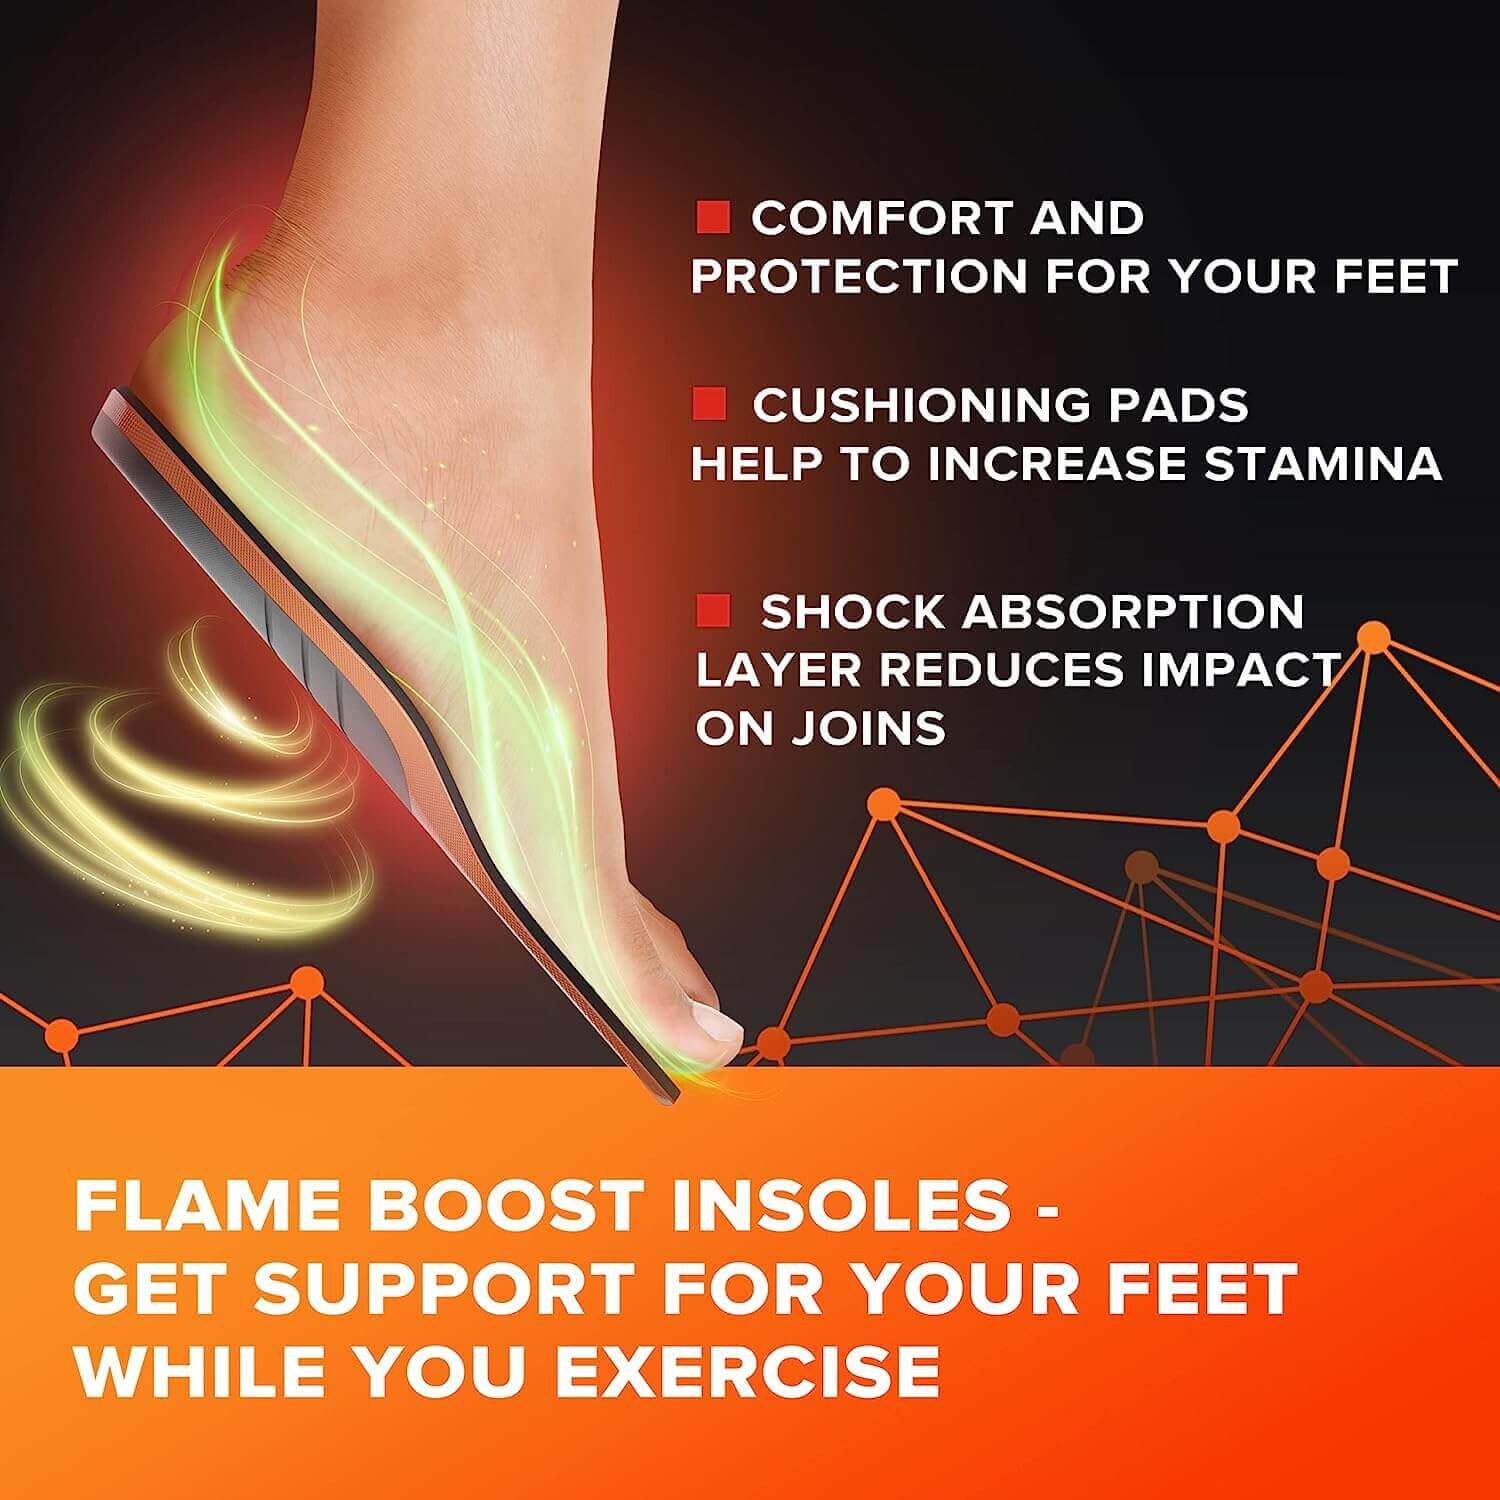 Shop The Latest >Sport Athletic Shoe Insoles Men Women - Ideal for Active Sports > *Only $53.99*> From The Top Brand > *Easyfeetl* > Shop Now and Get Free Shipping On Orders Over $45.00 >*Shop Earth Foot*